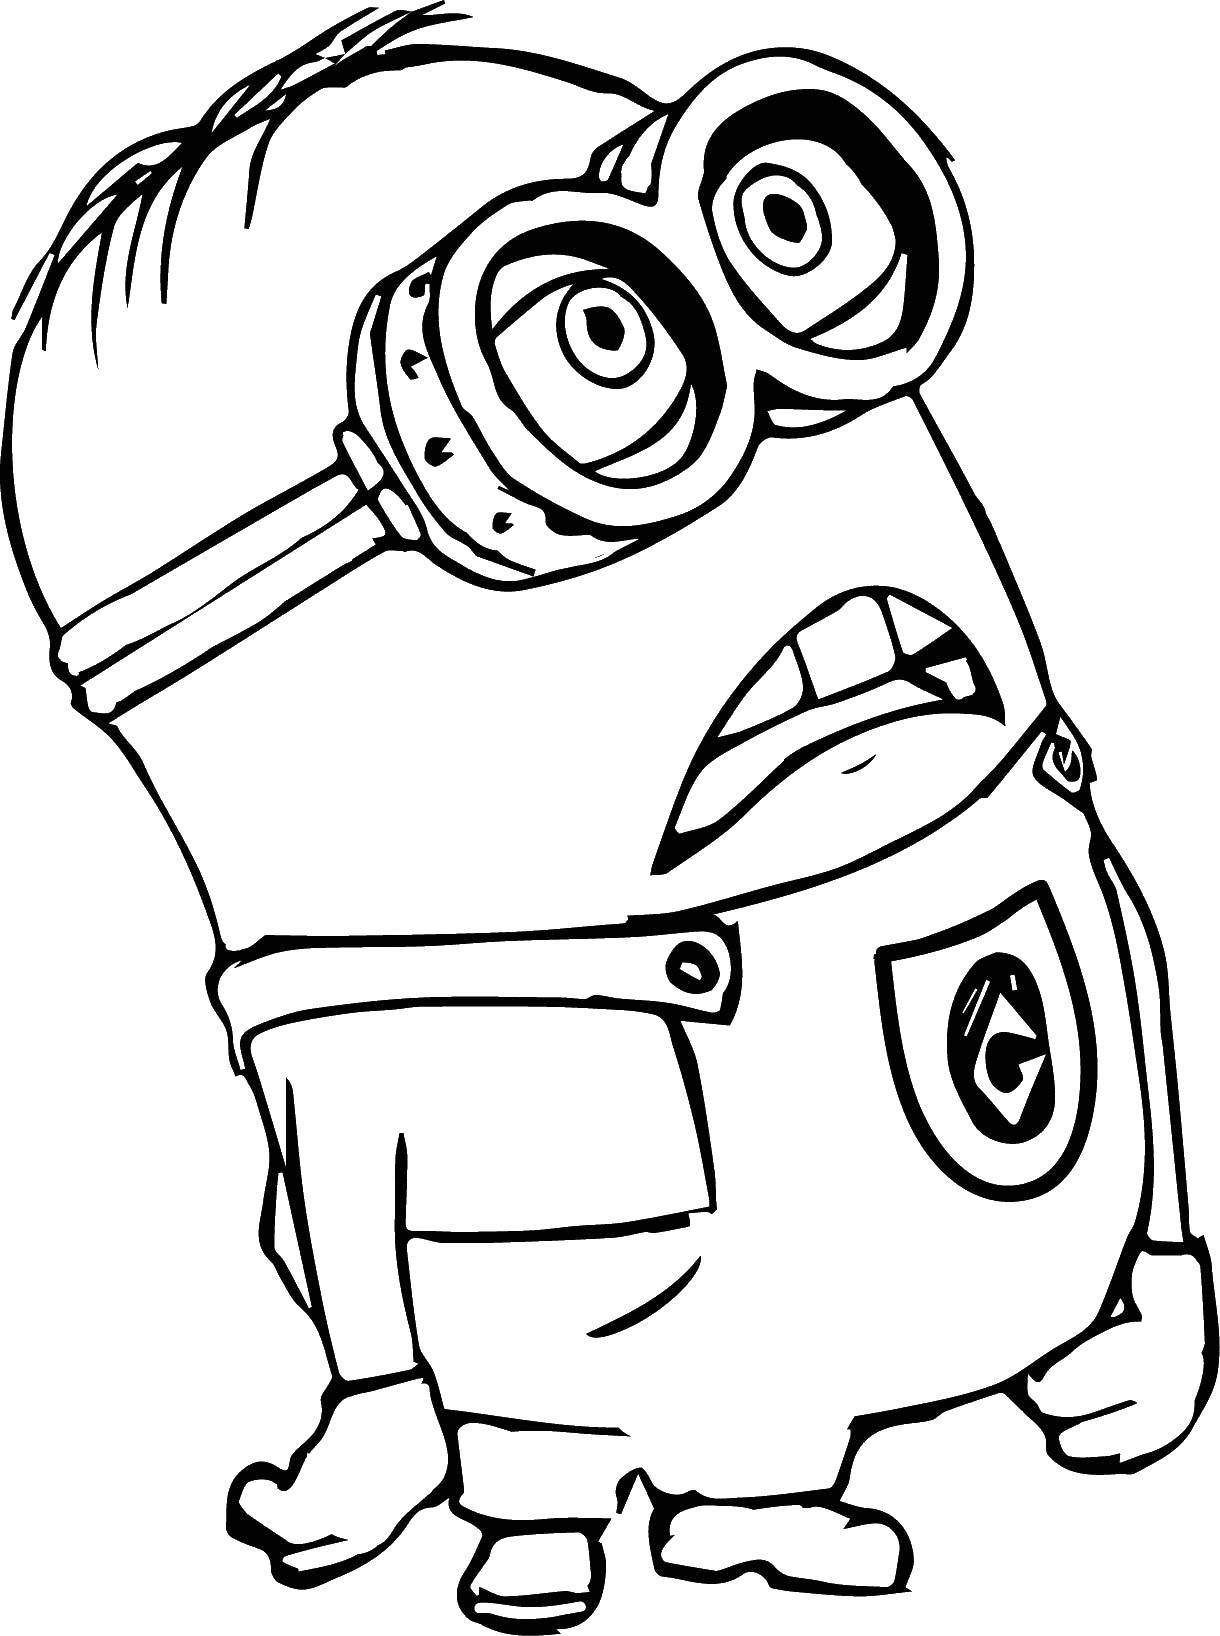 Coloring Dejected, minion. Category the minions. Tags:  minion.